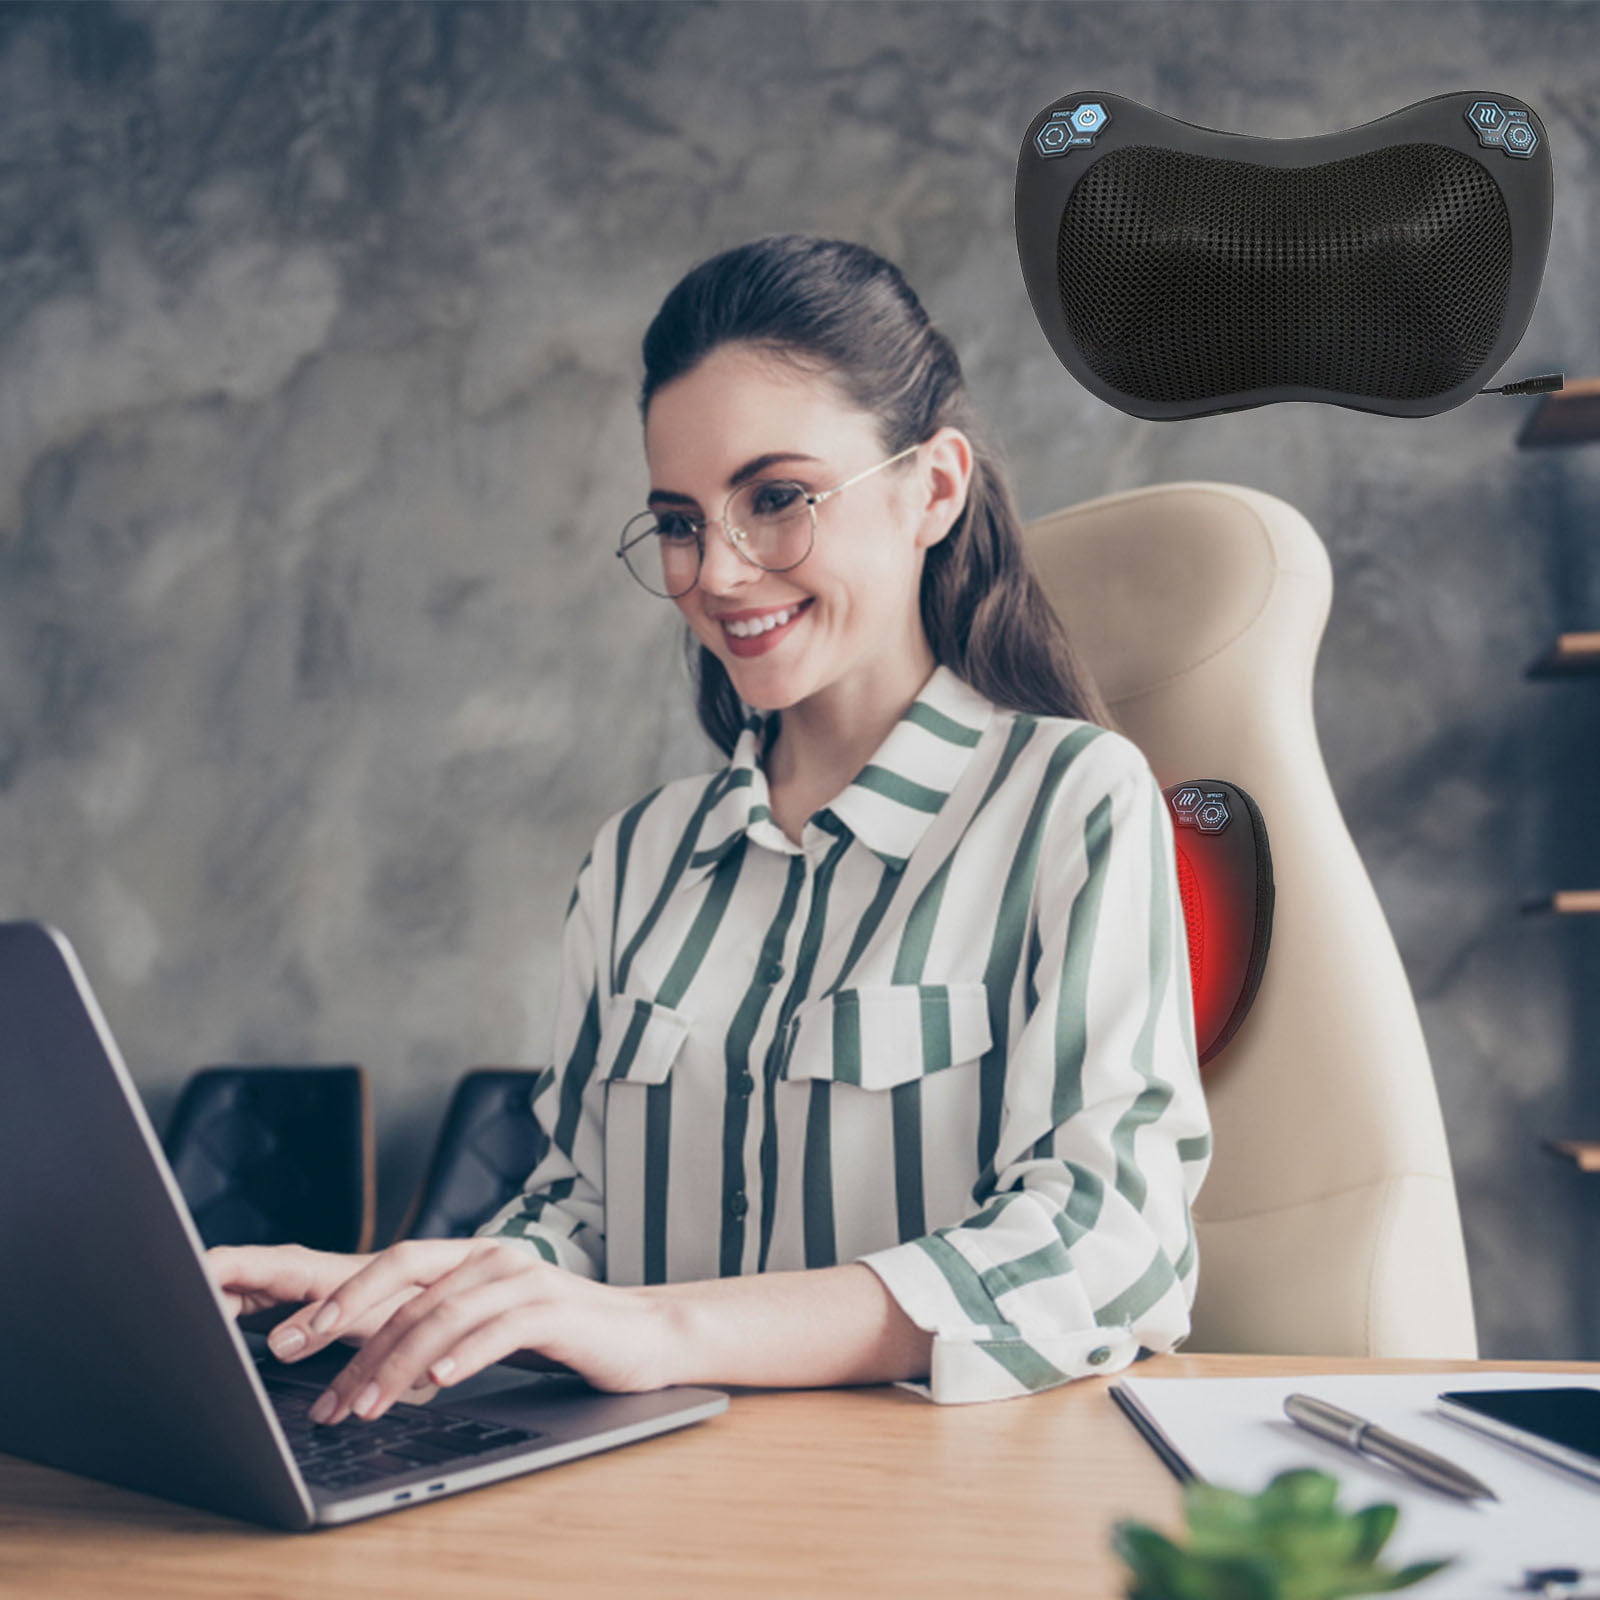 Electric Multifunctional Car Headrest Massager - Tension seekers